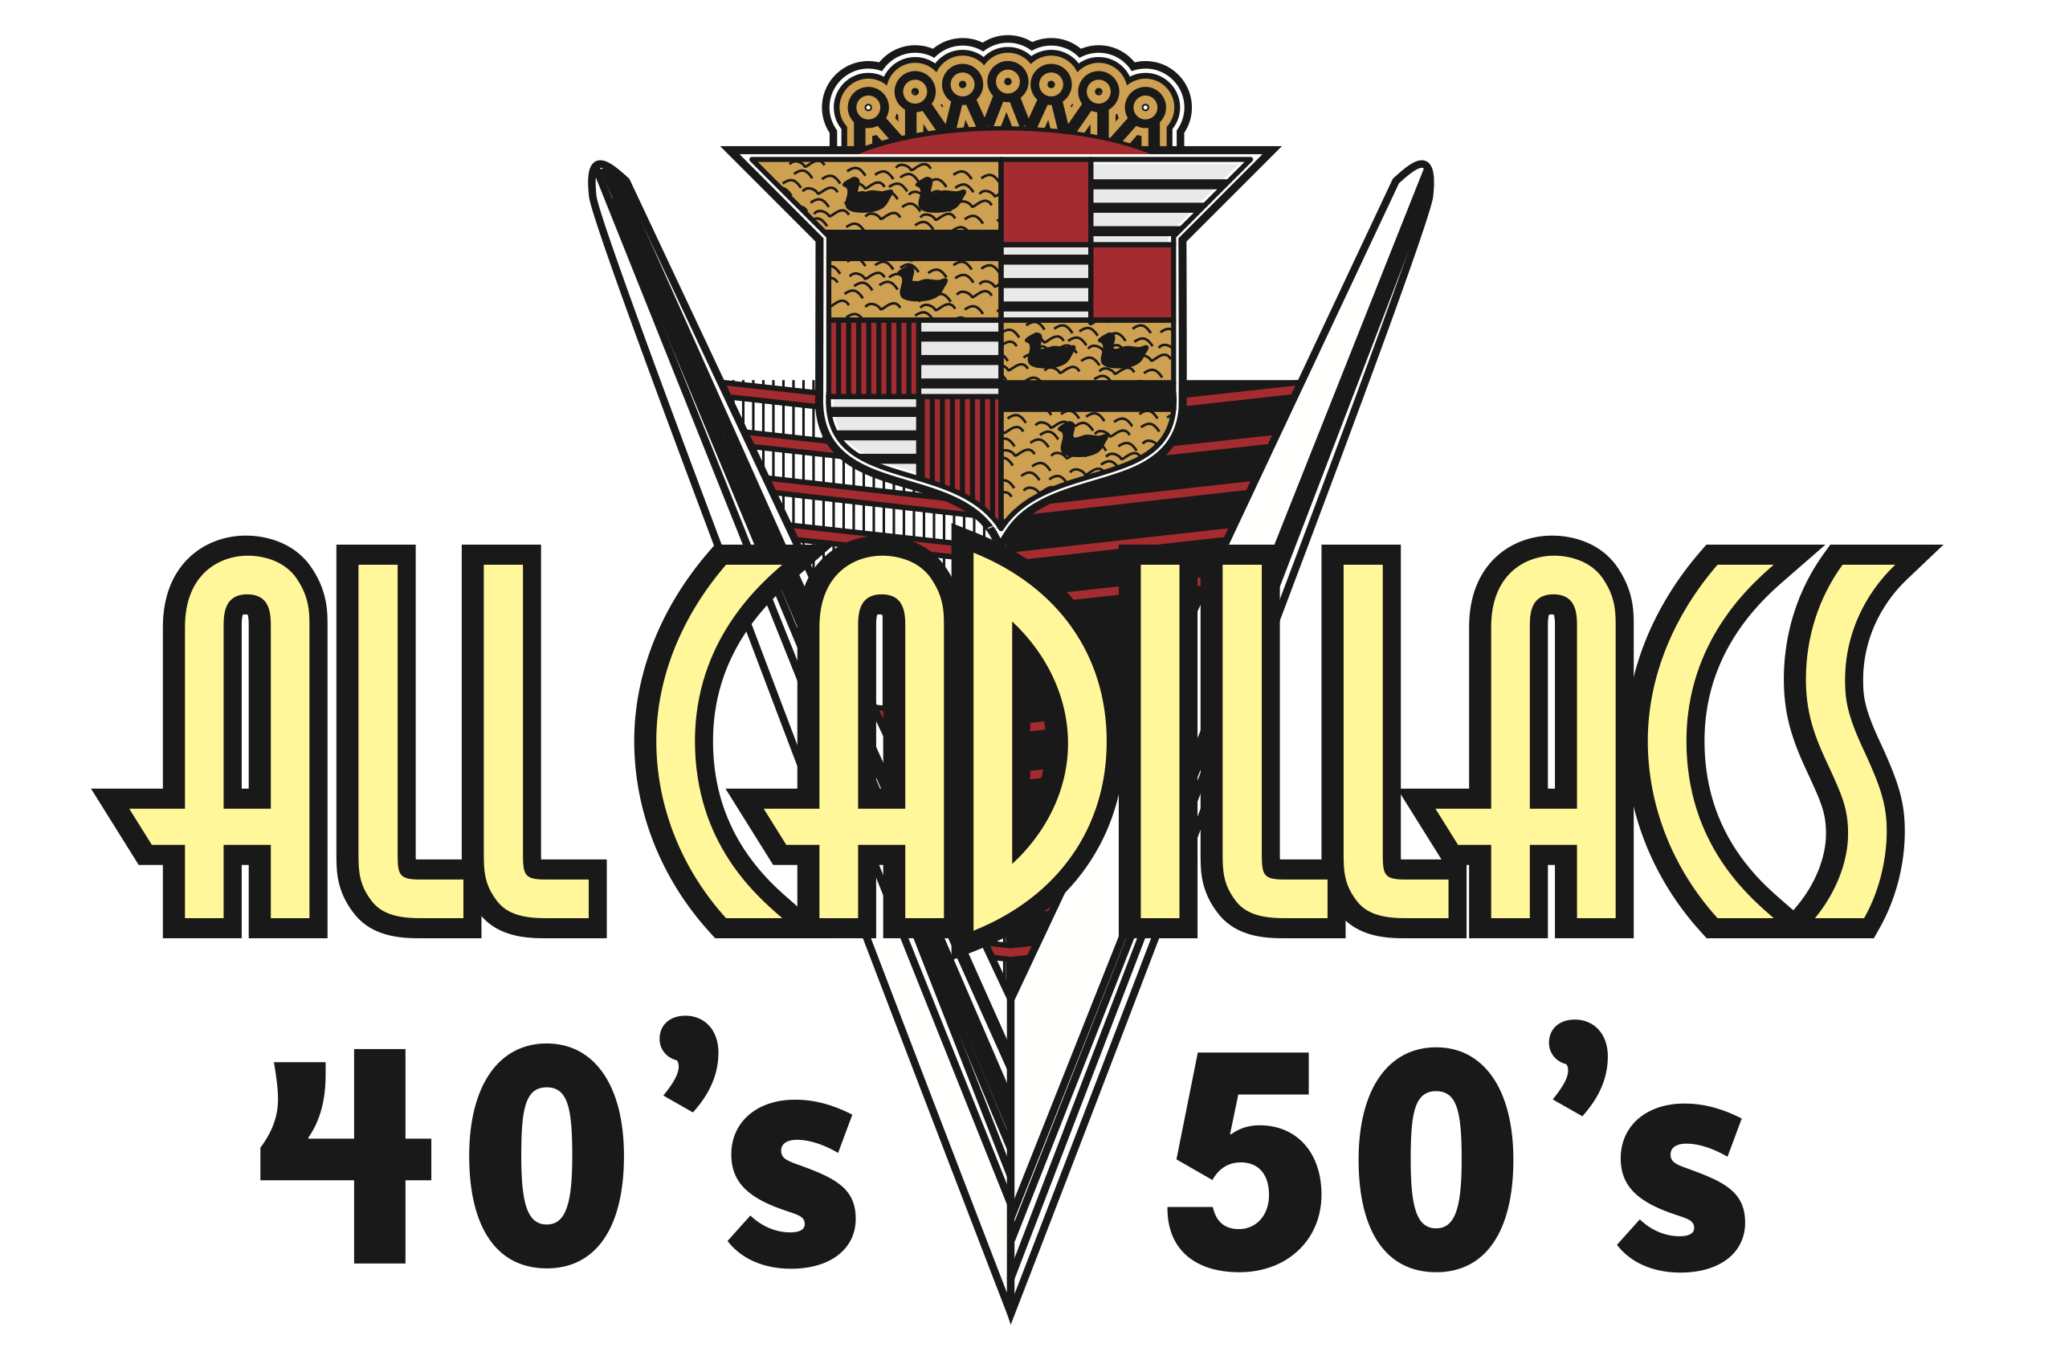 All Cadillacs of the 40s and 50s